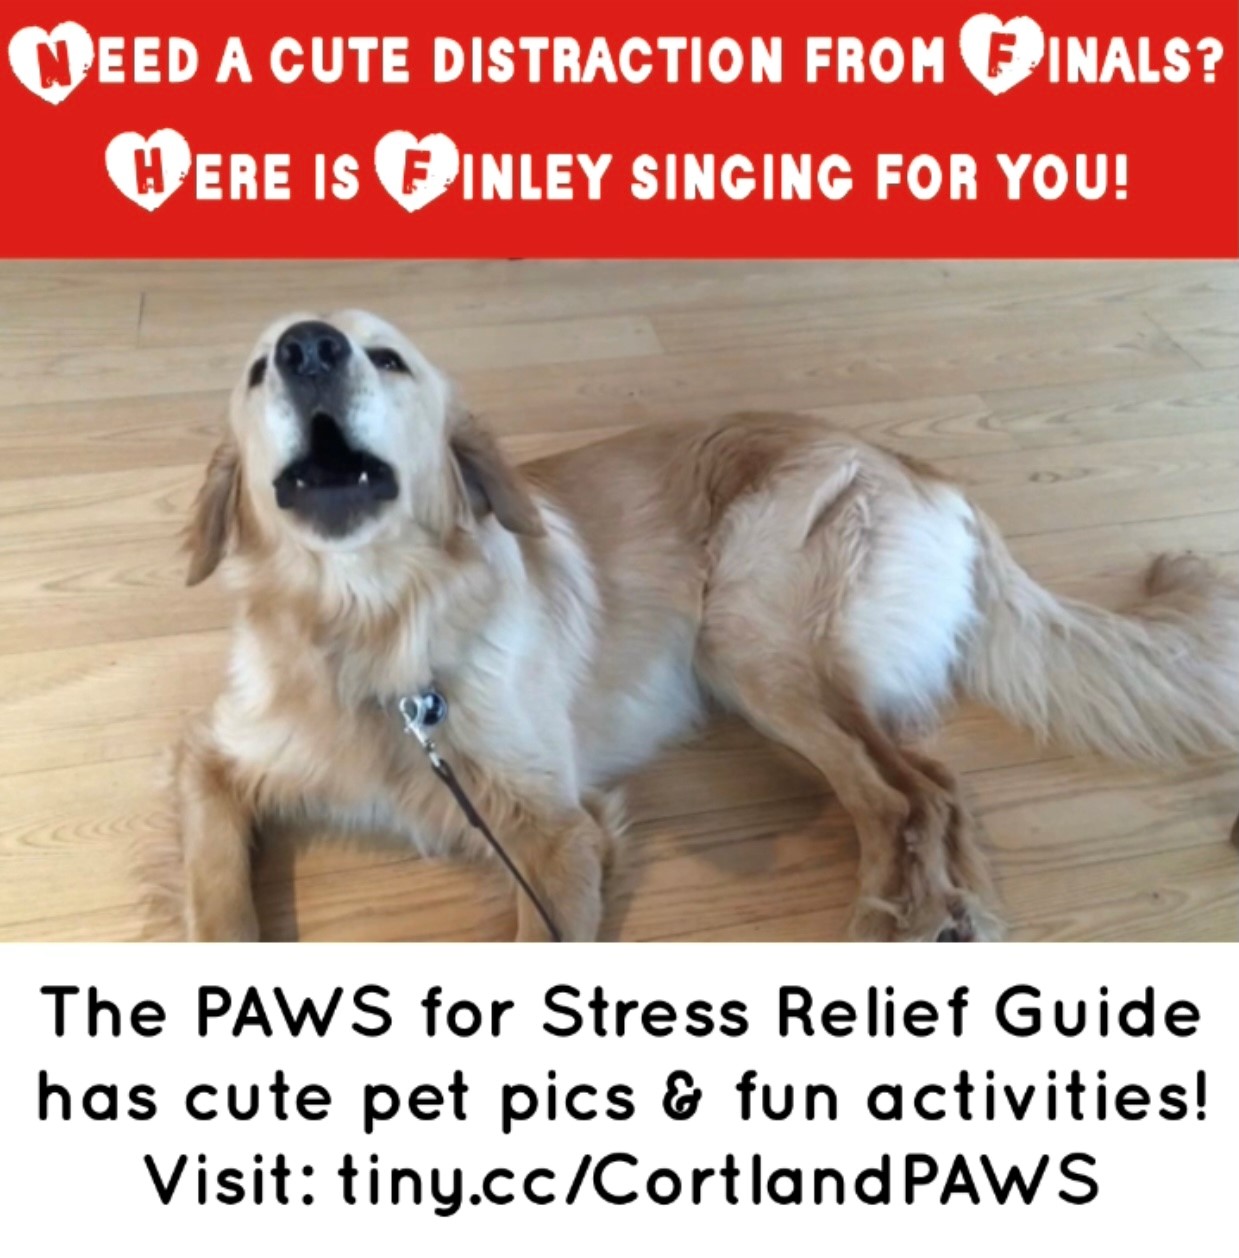 Image of a dog singing for PAWS for Stress Relief